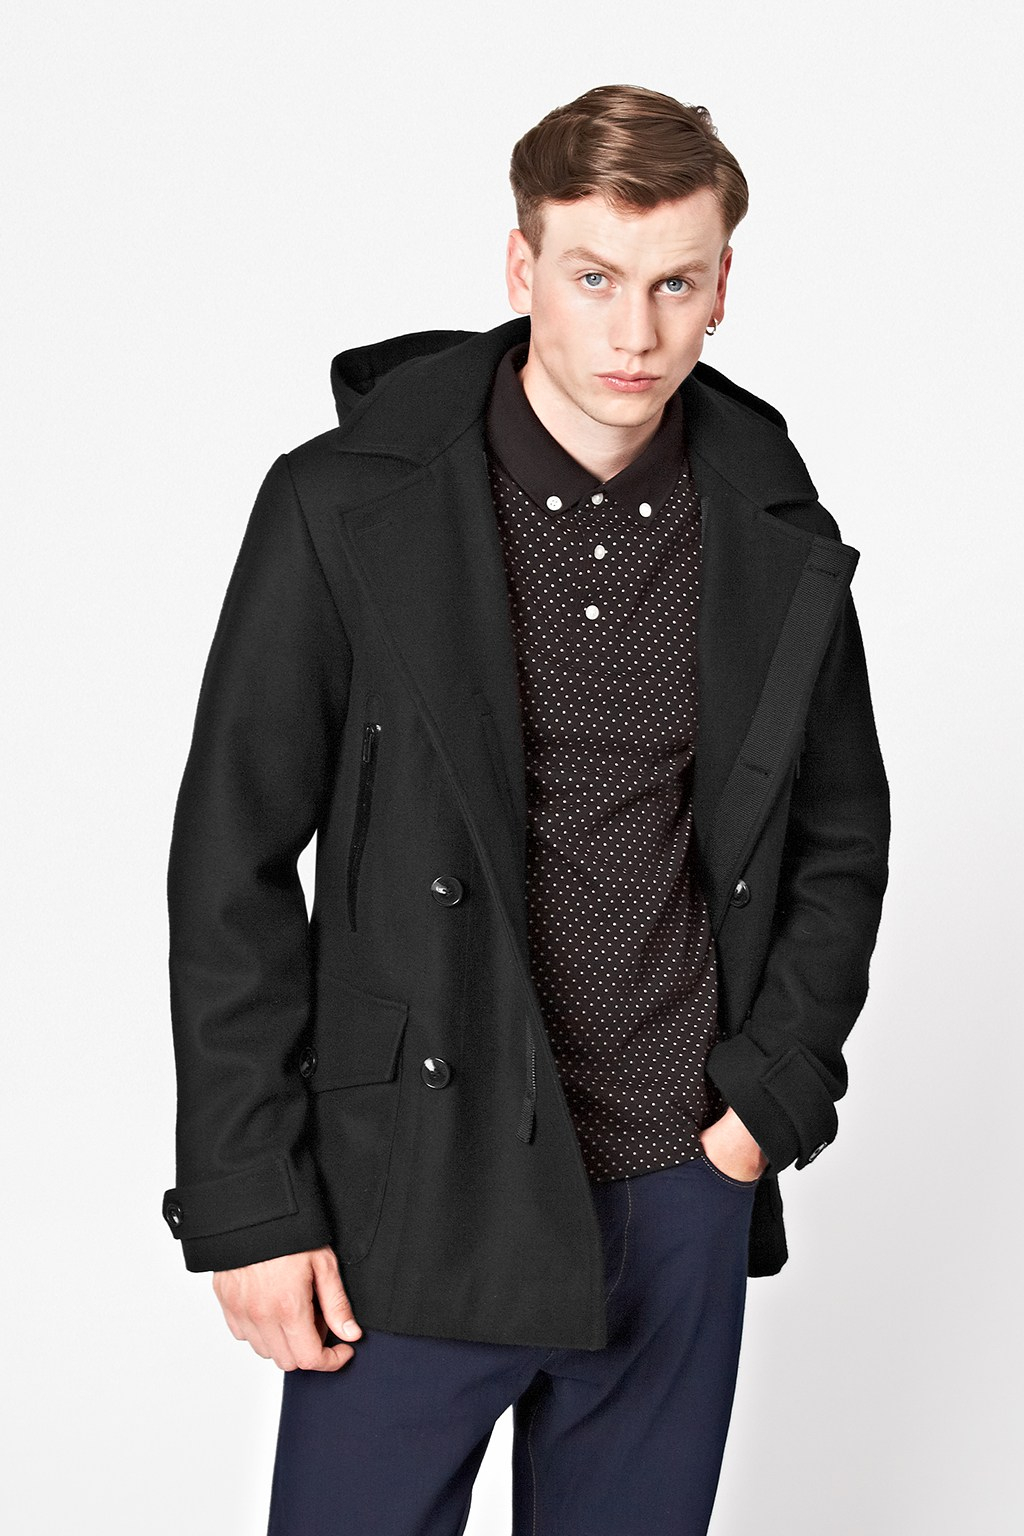 French Connection Marine Melton Jacket in Black for Men - Lyst